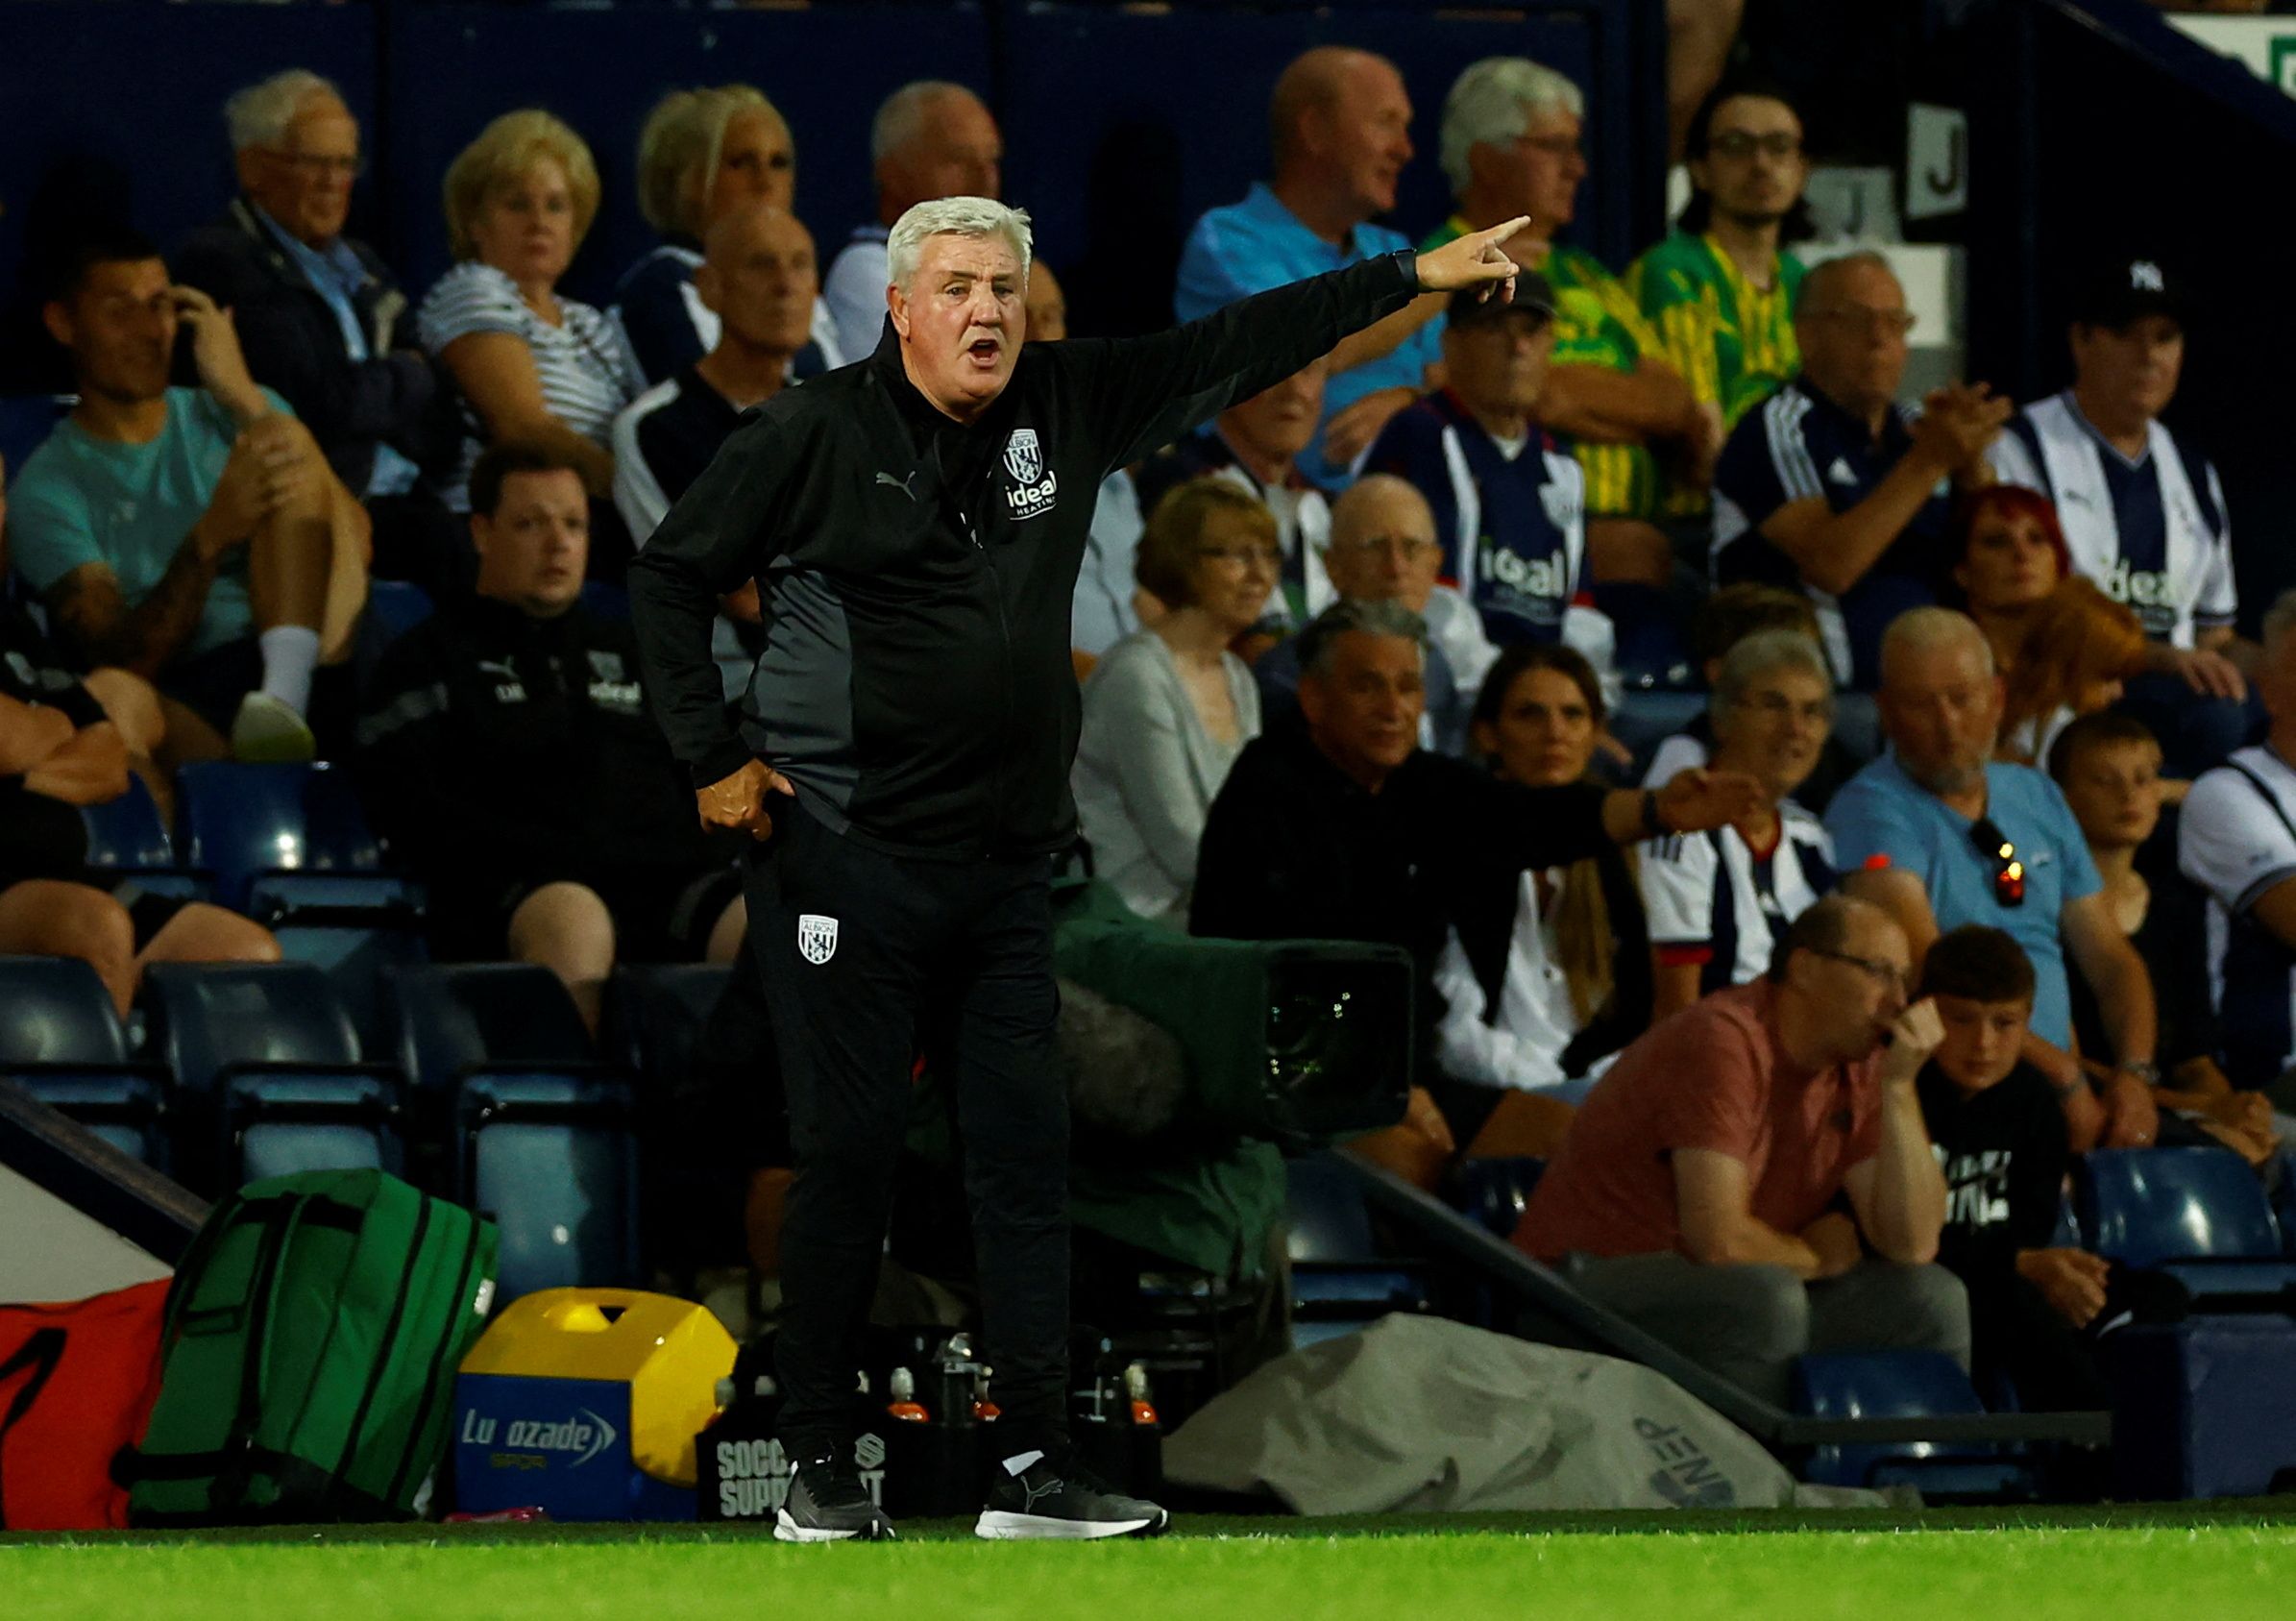 Soccer Football - Championship - West Bromwich Albion v Watford - The Hawthorns, West Bromwich, Britain - August 8, 2022 West Bromwich Albion's manager Steve Bruce Action Images/Andrew Boyers  EDITORIAL USE ONLY. No use with unauthorized audio, video, data, fixture lists, club/league logos or 